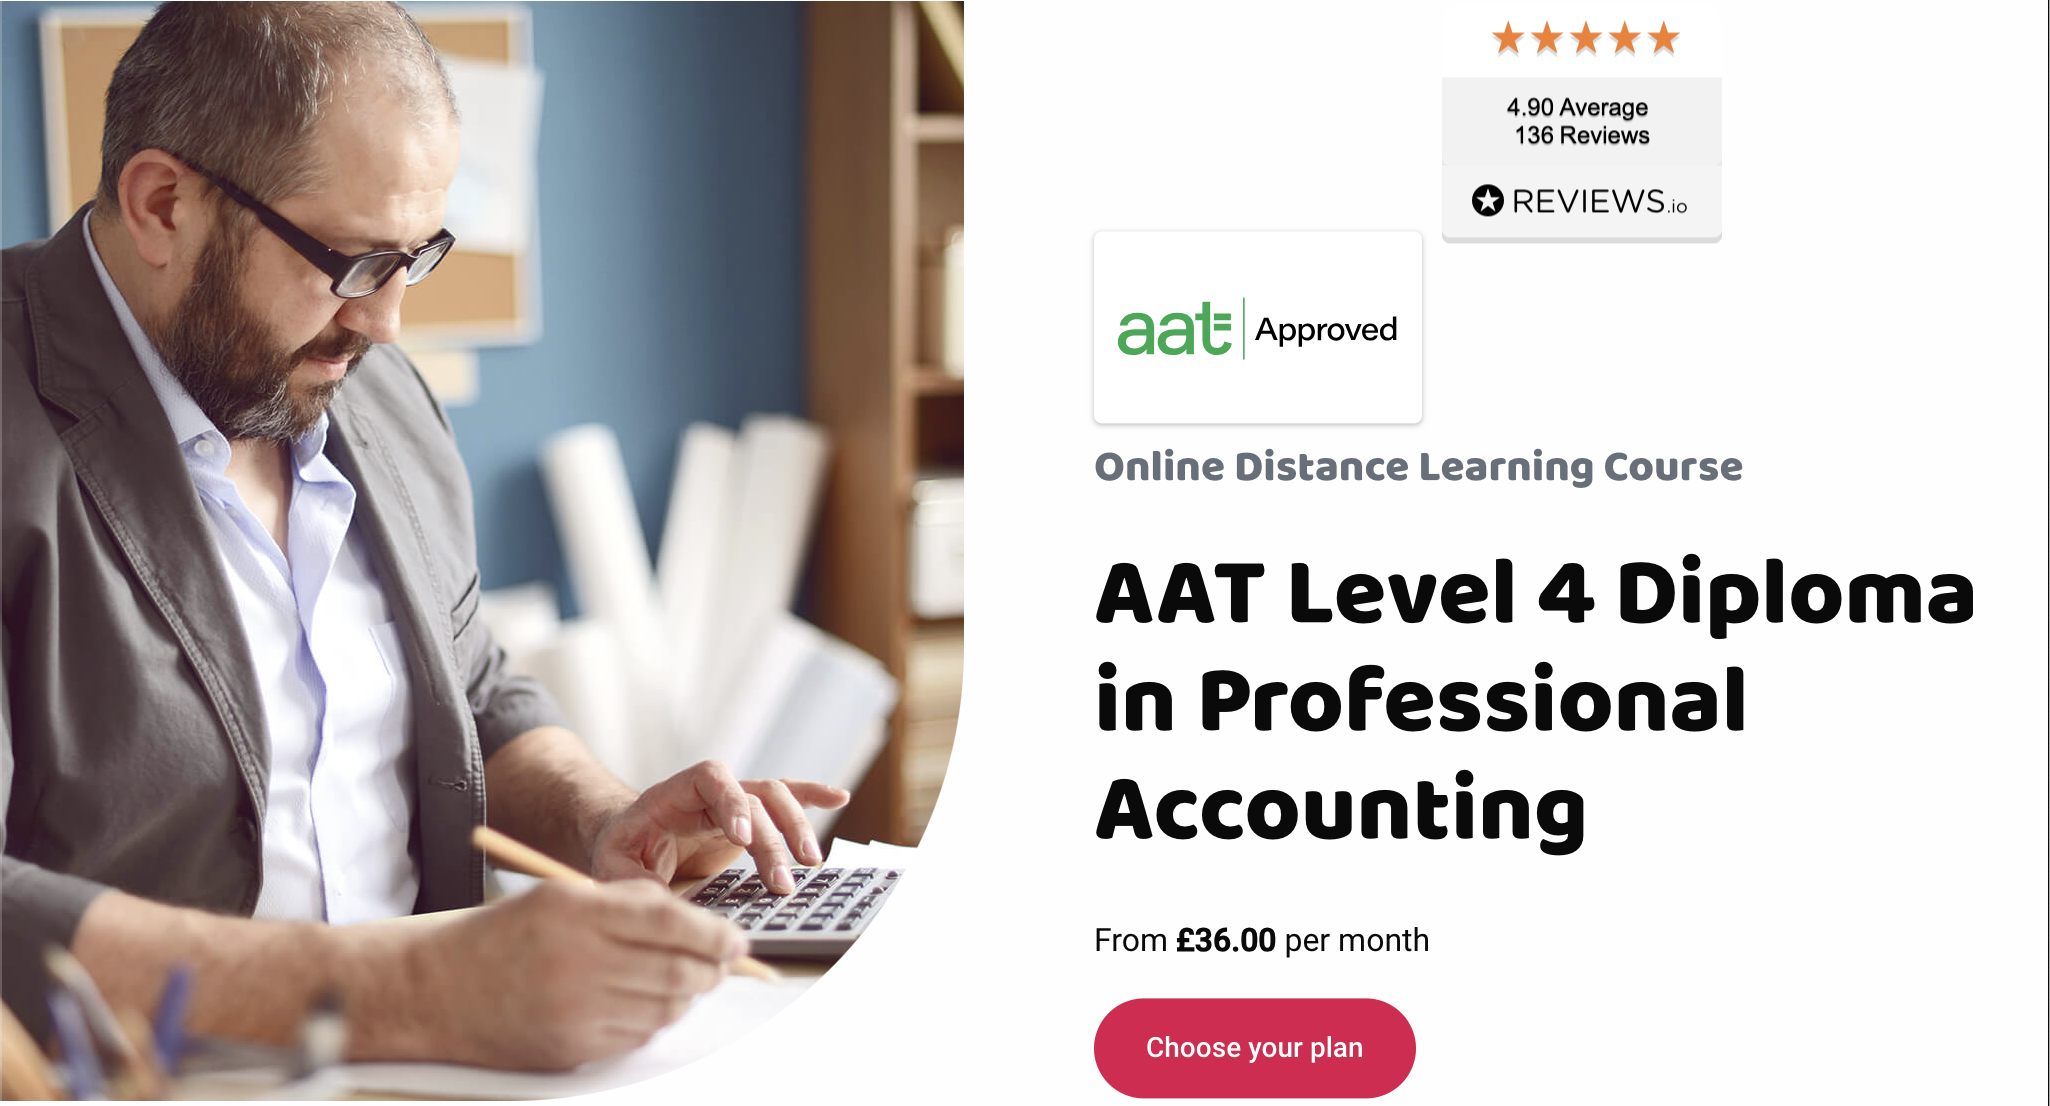 AAT Level 4 Diploma in Professional Accounting